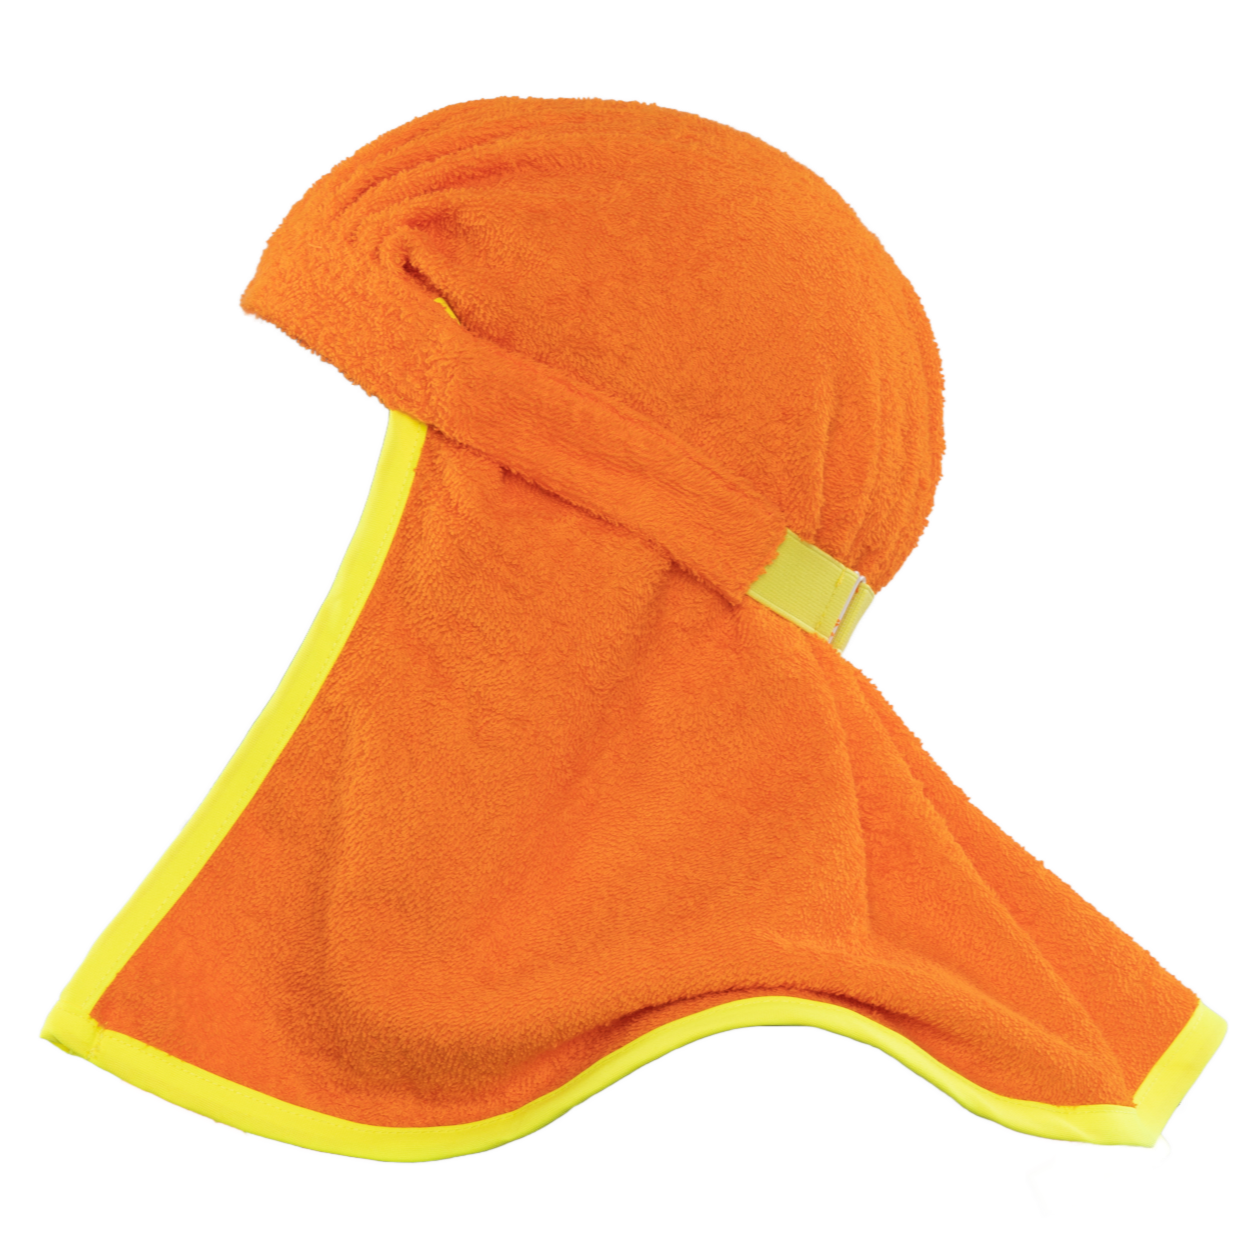 Polarheads PRO 3-in-1 Neck Shade, Sweatband and Cooling Towel - Safety Orange/Safety Yellow